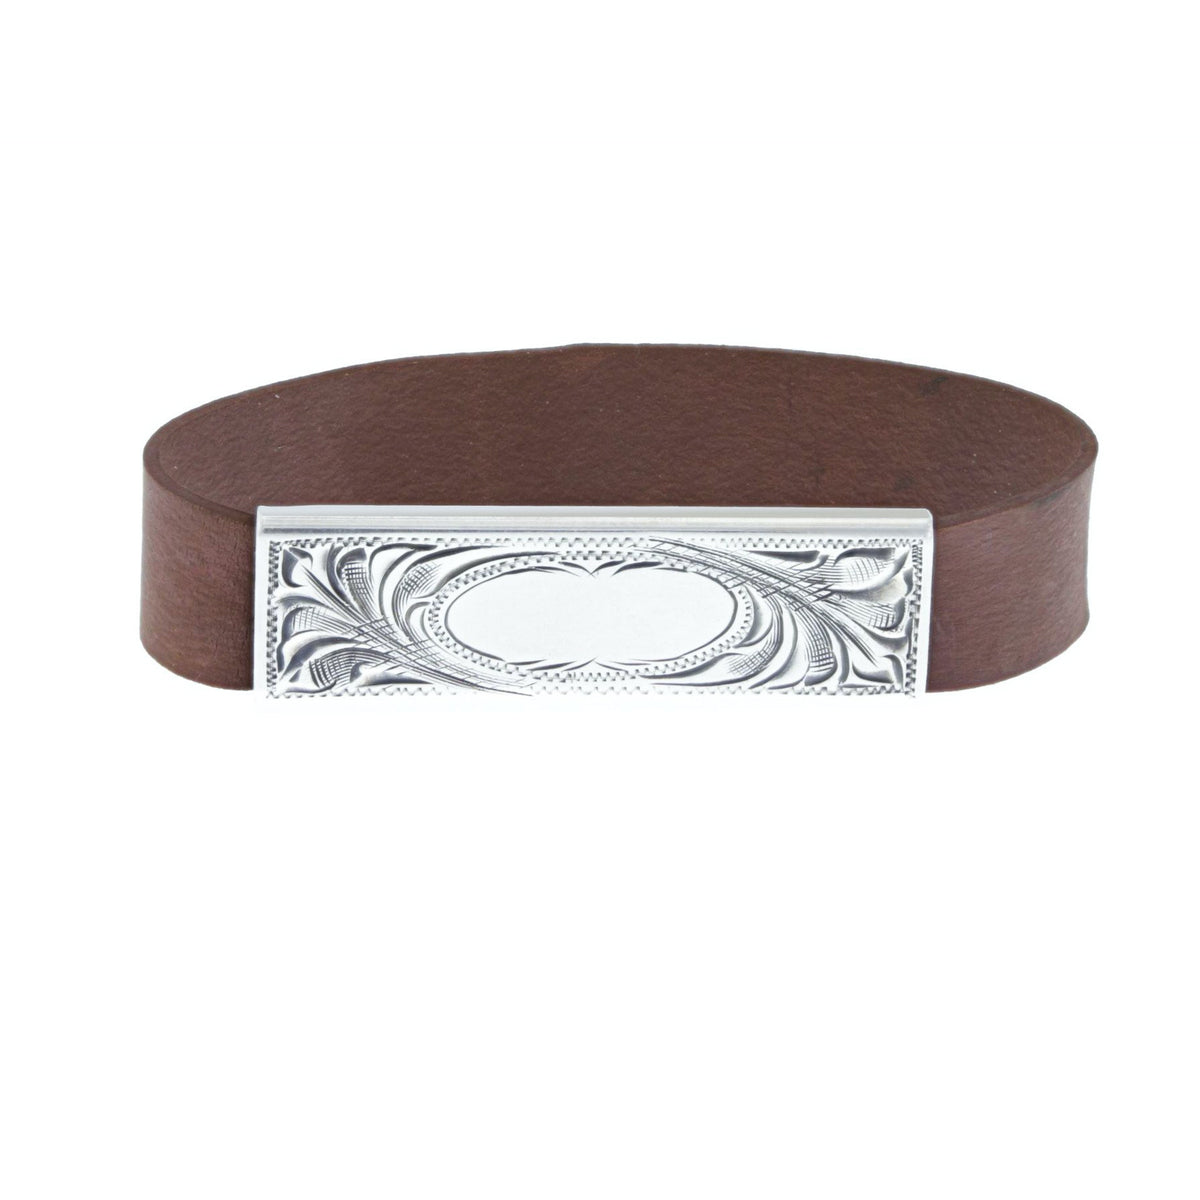 Rubber Band 1801 Sterling Scroll Engraved Money Clip